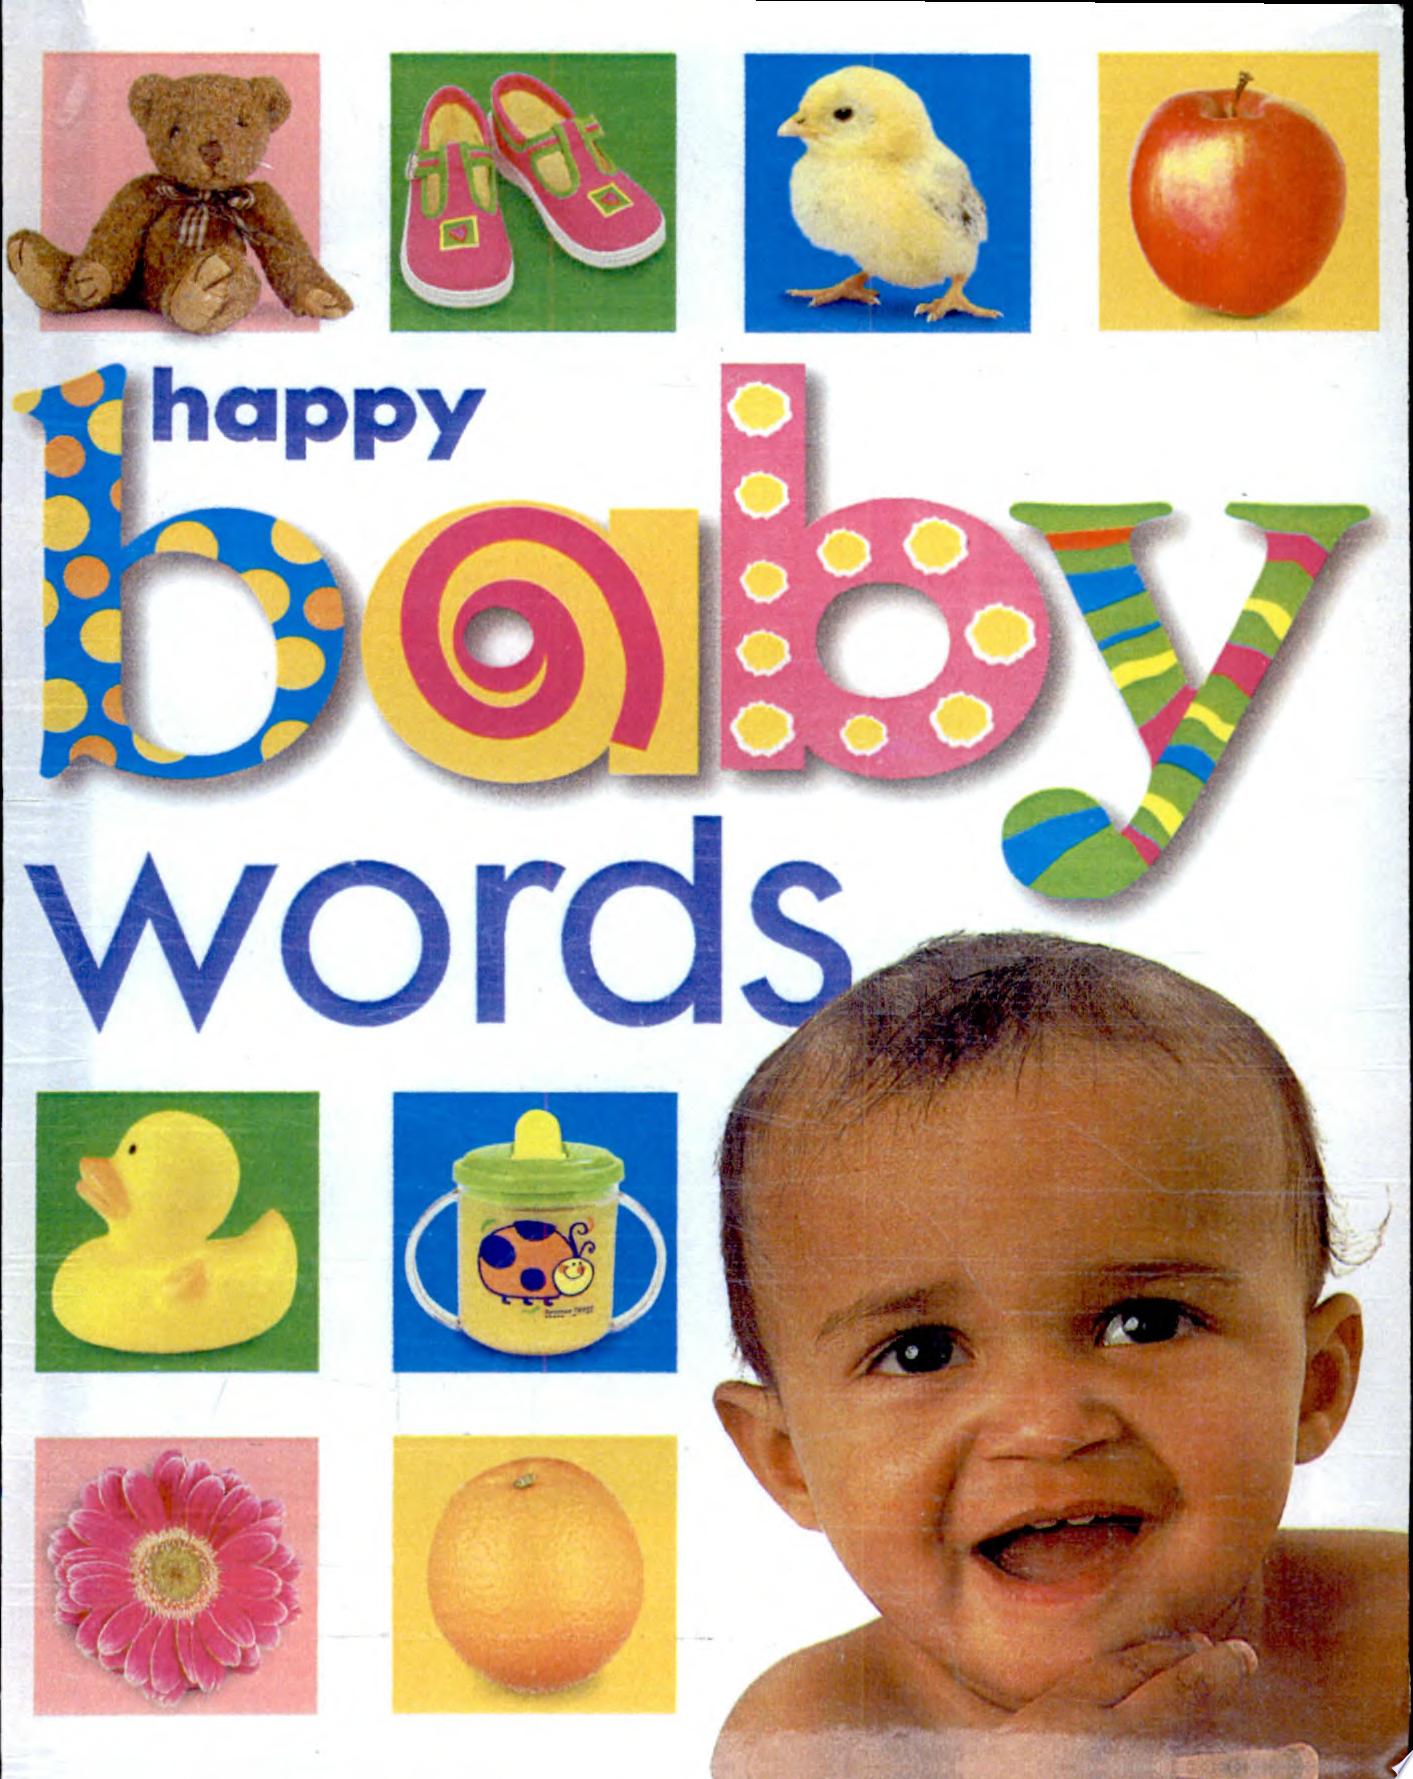 Image for "Happy Baby: Words"